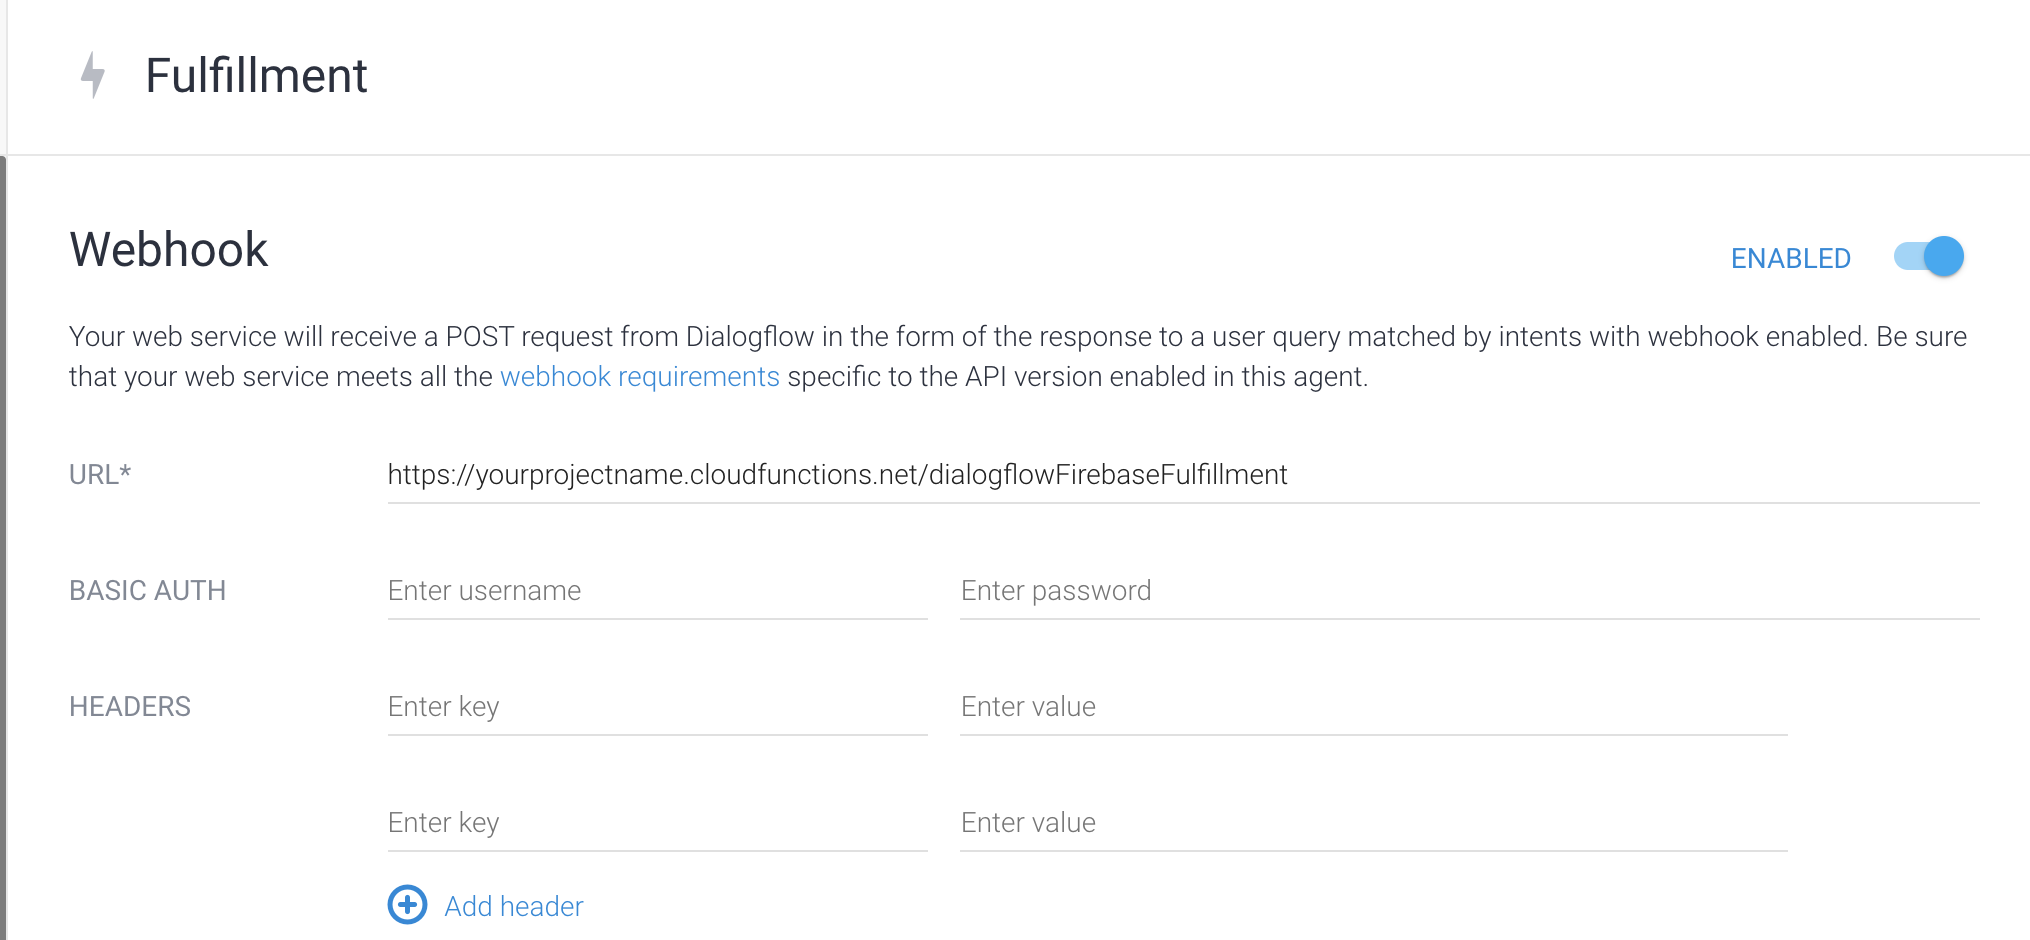 Now, try asking your Dialogflow Agent to play trivia! It should ask you three questions before letting you back to sleep!